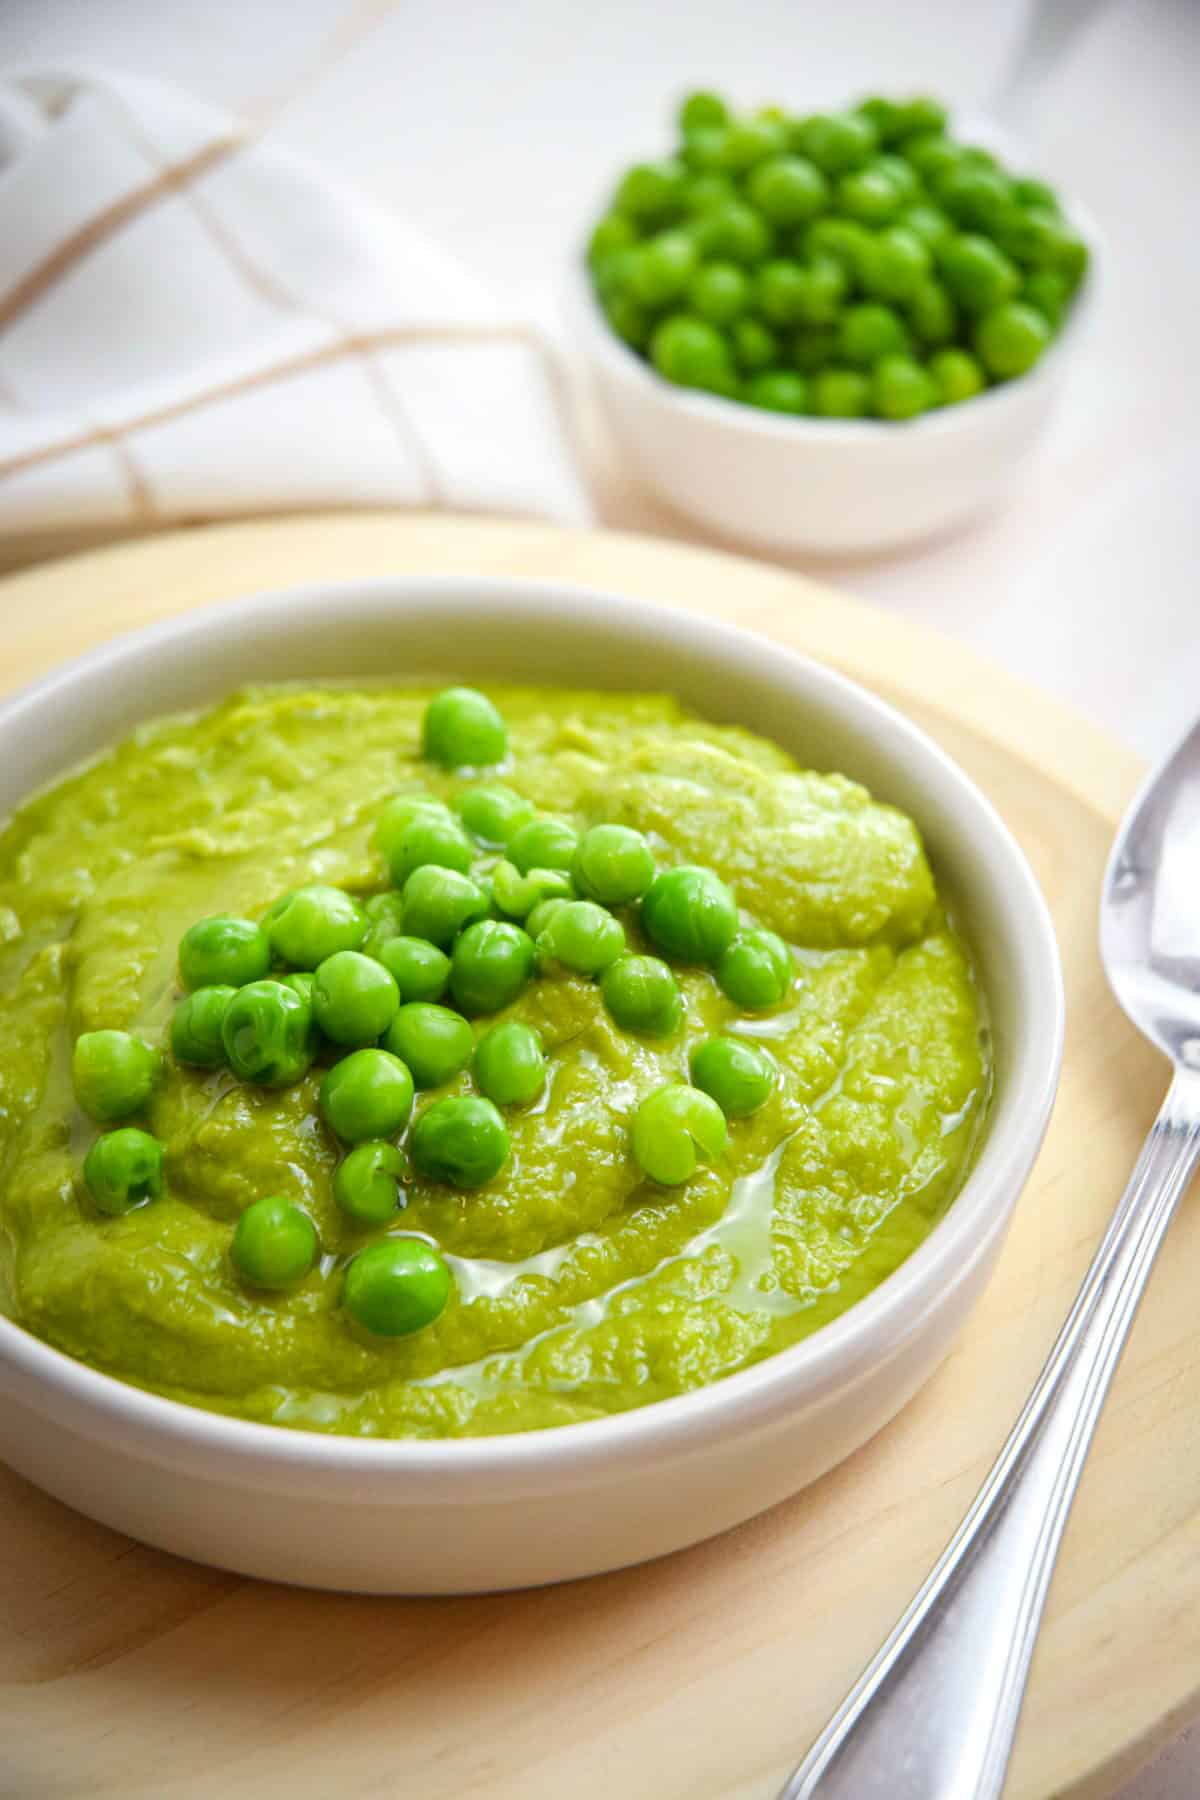 Pea purée in a white bowl on wooden plate, with a spoon on the side and green peas in the background.